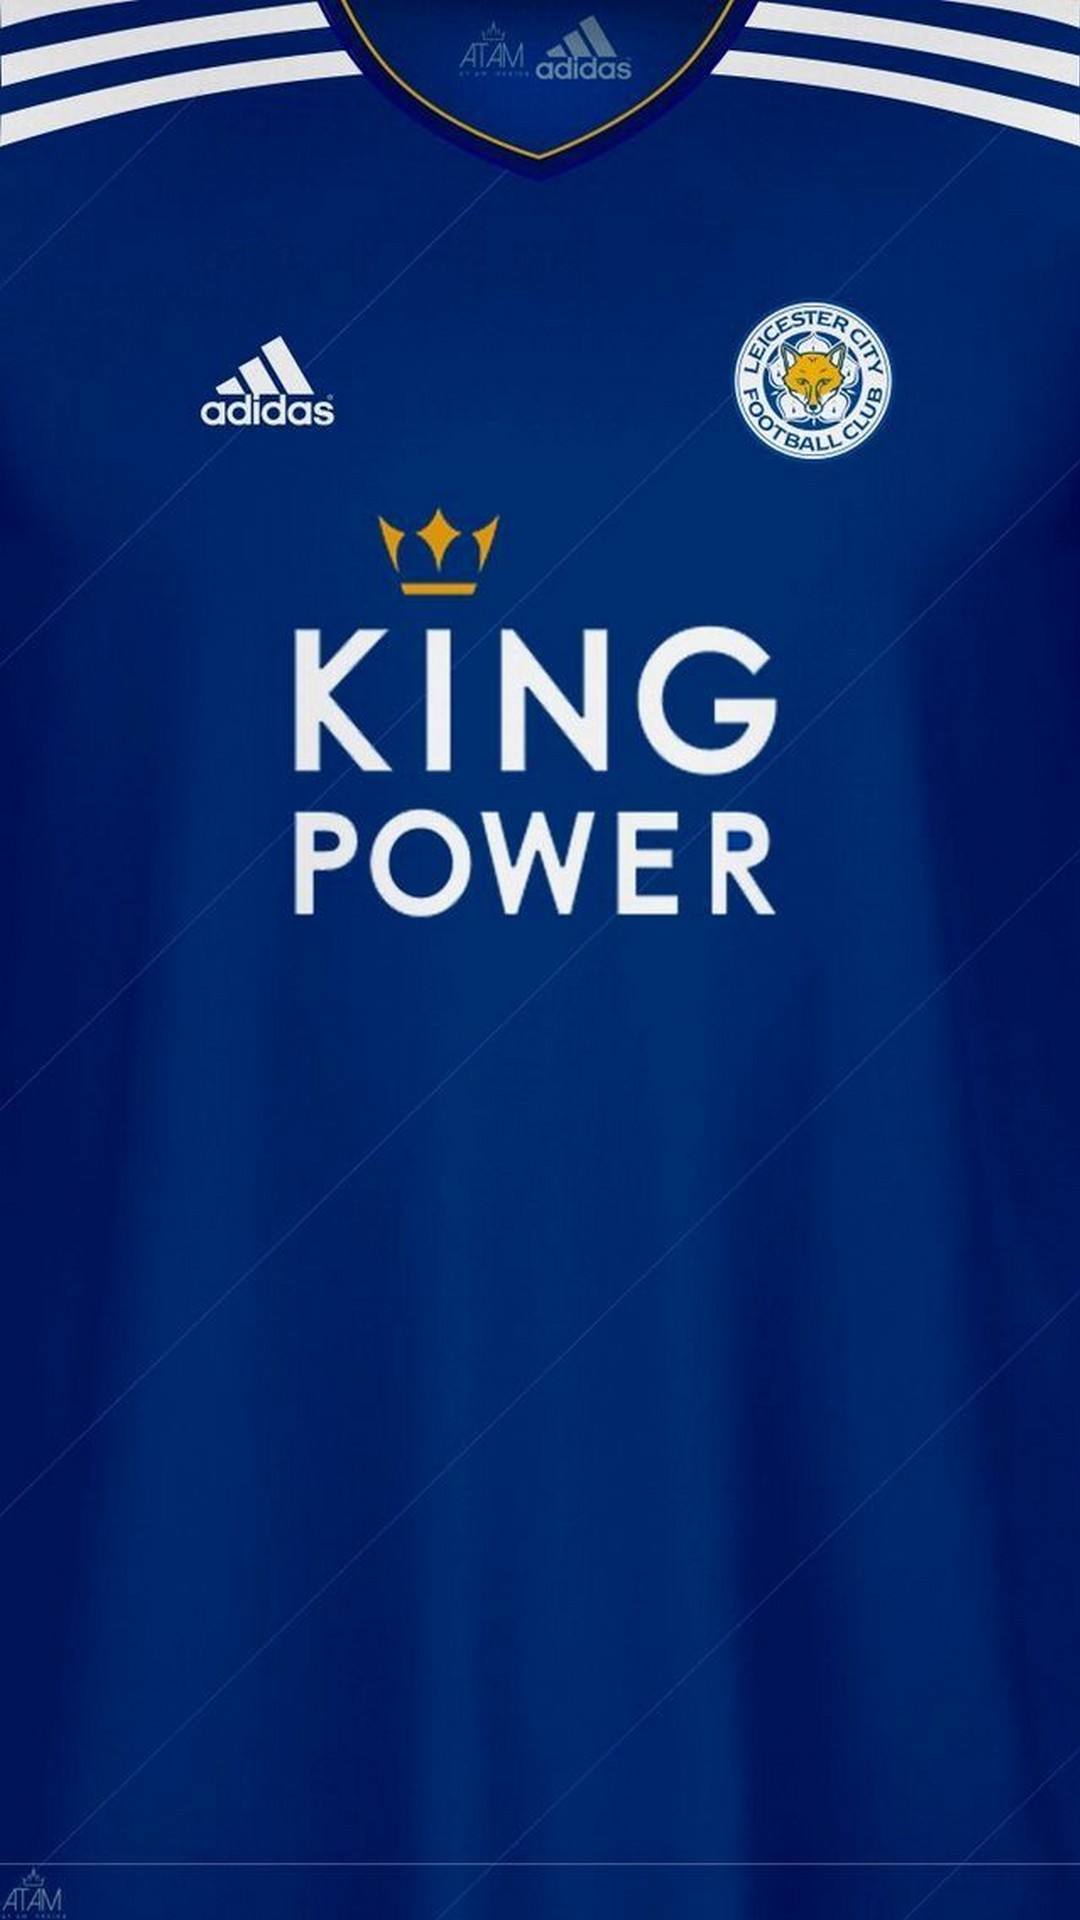 Leicester City HD Wallpaper For iPhone with high-resolution 1080x1920 pixel. You can use this wallpaper for your Desktop Computers, Mac Screensavers, Windows Backgrounds, iPhone Wallpapers, Tablet or Android Lock screen and another Mobile device